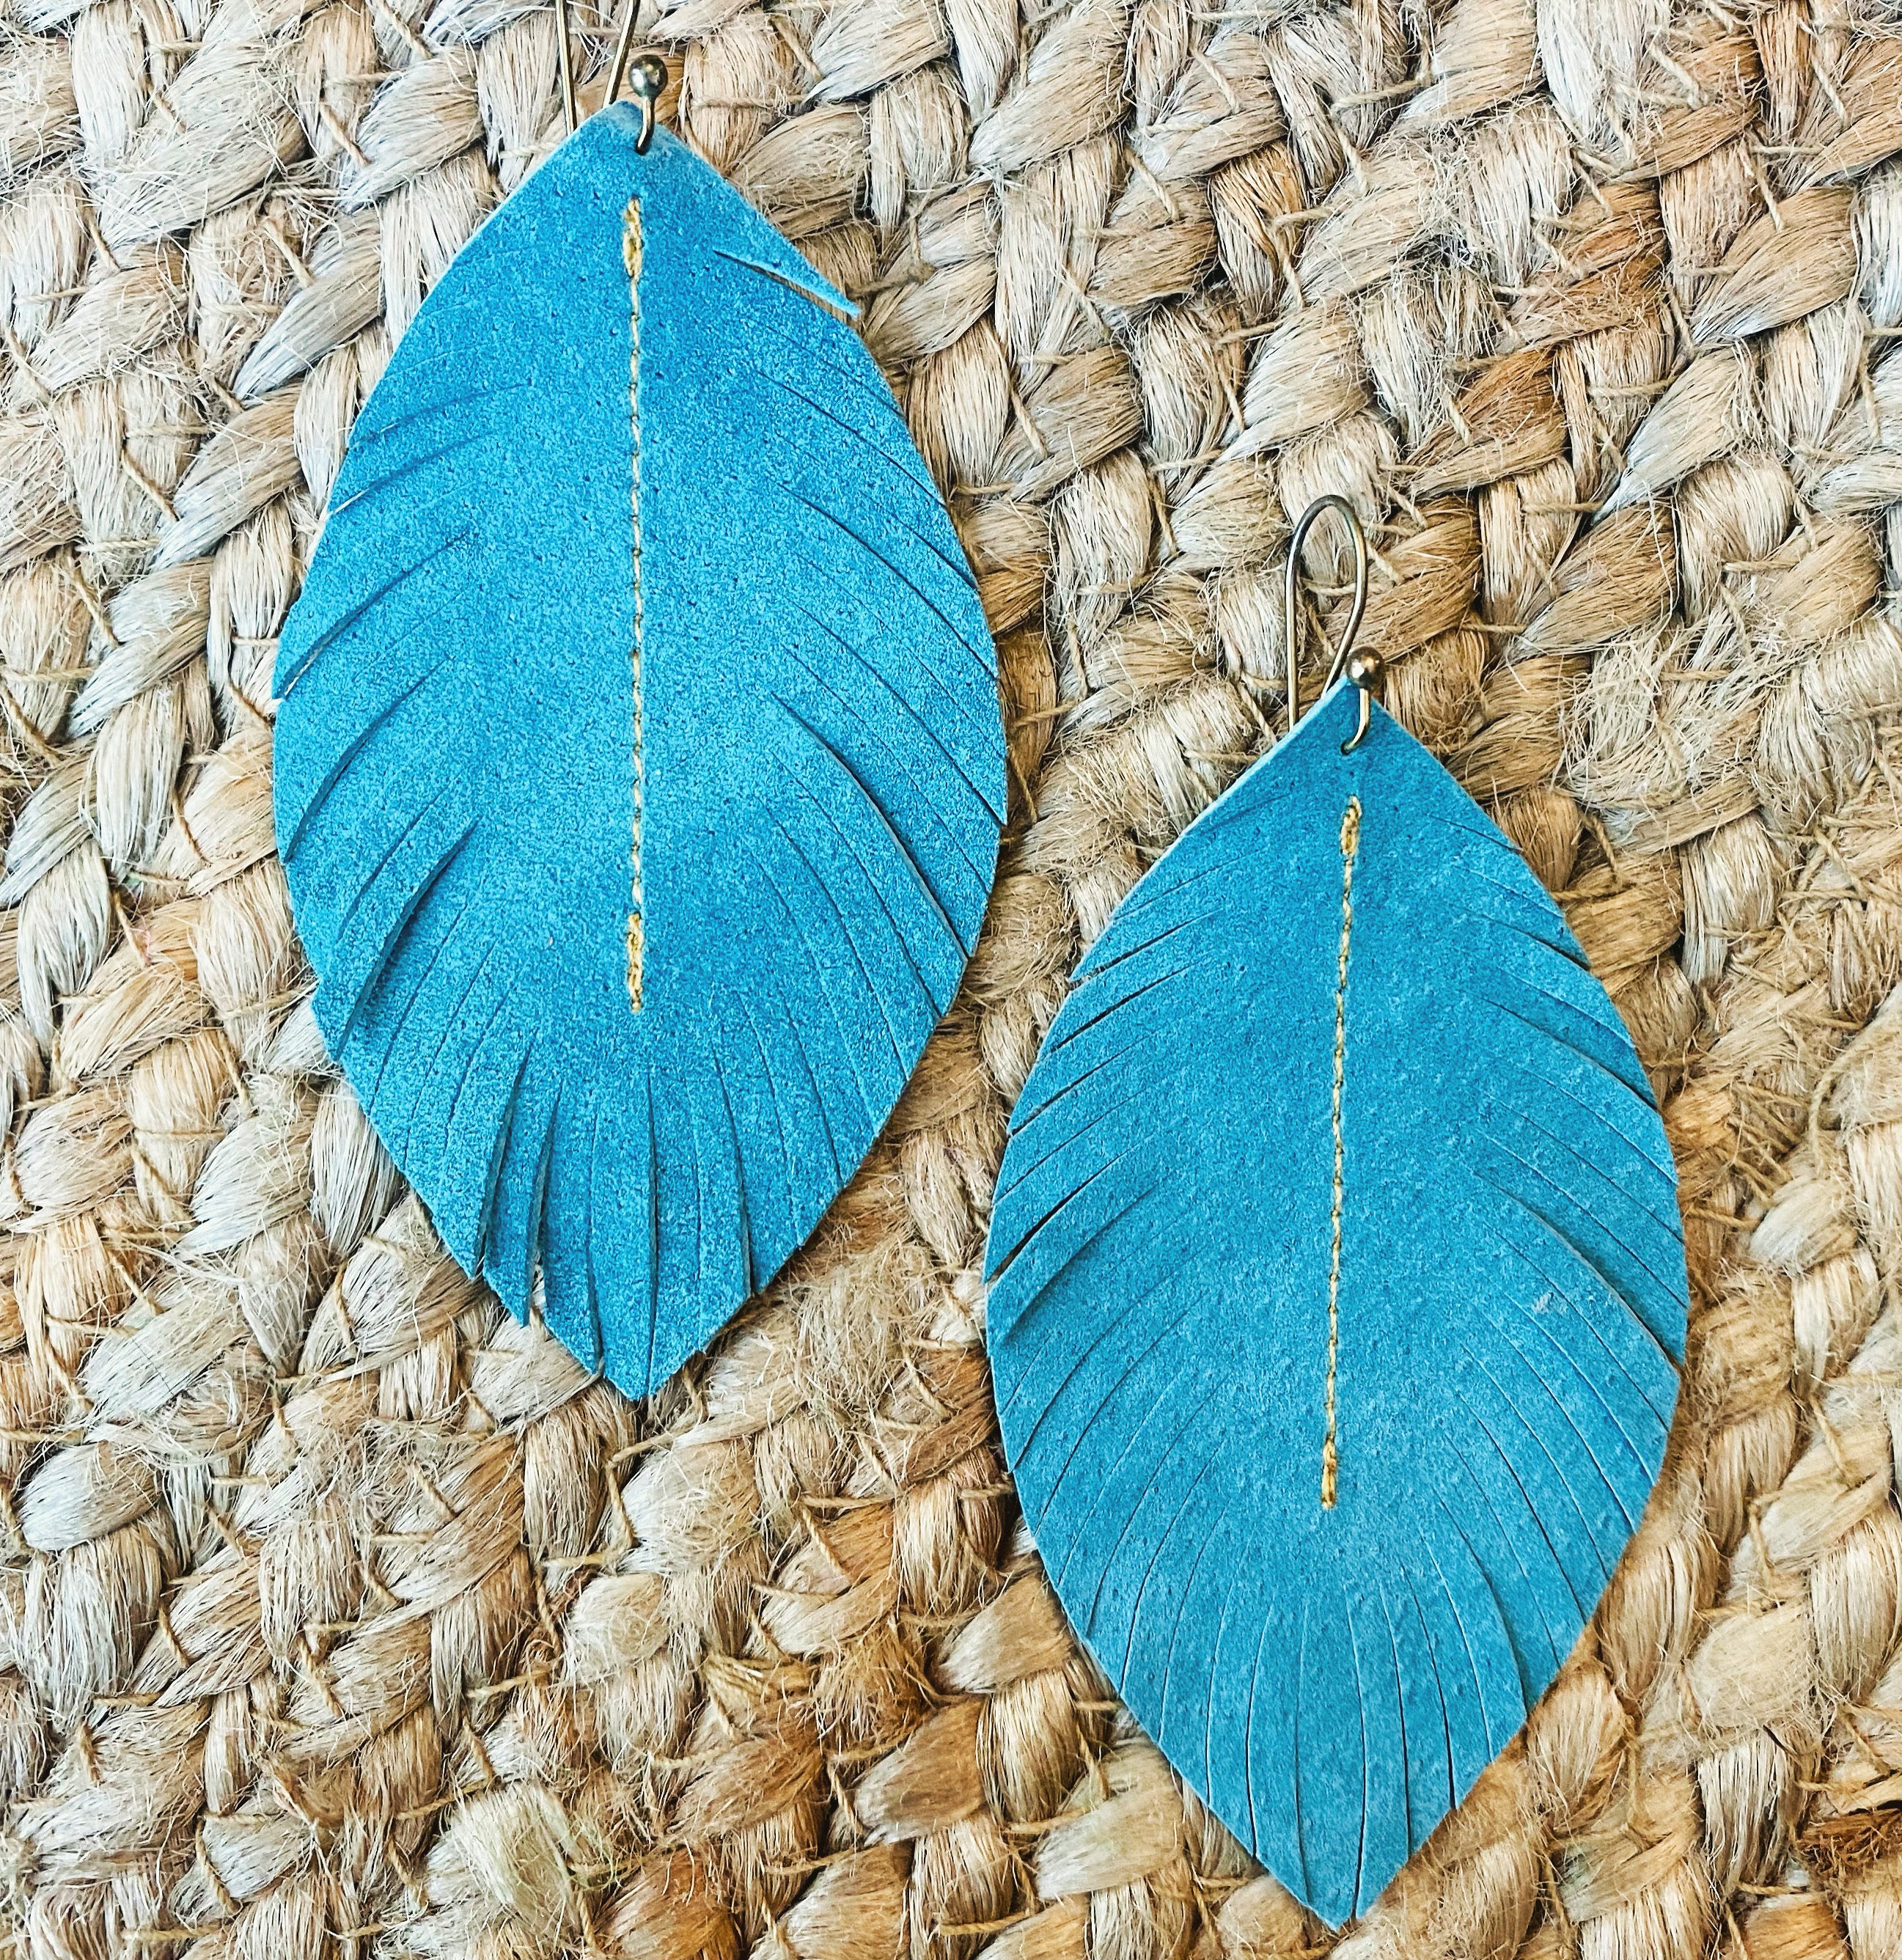 Designs Dusty Turquoise Sky – Suede Feathers Sunny